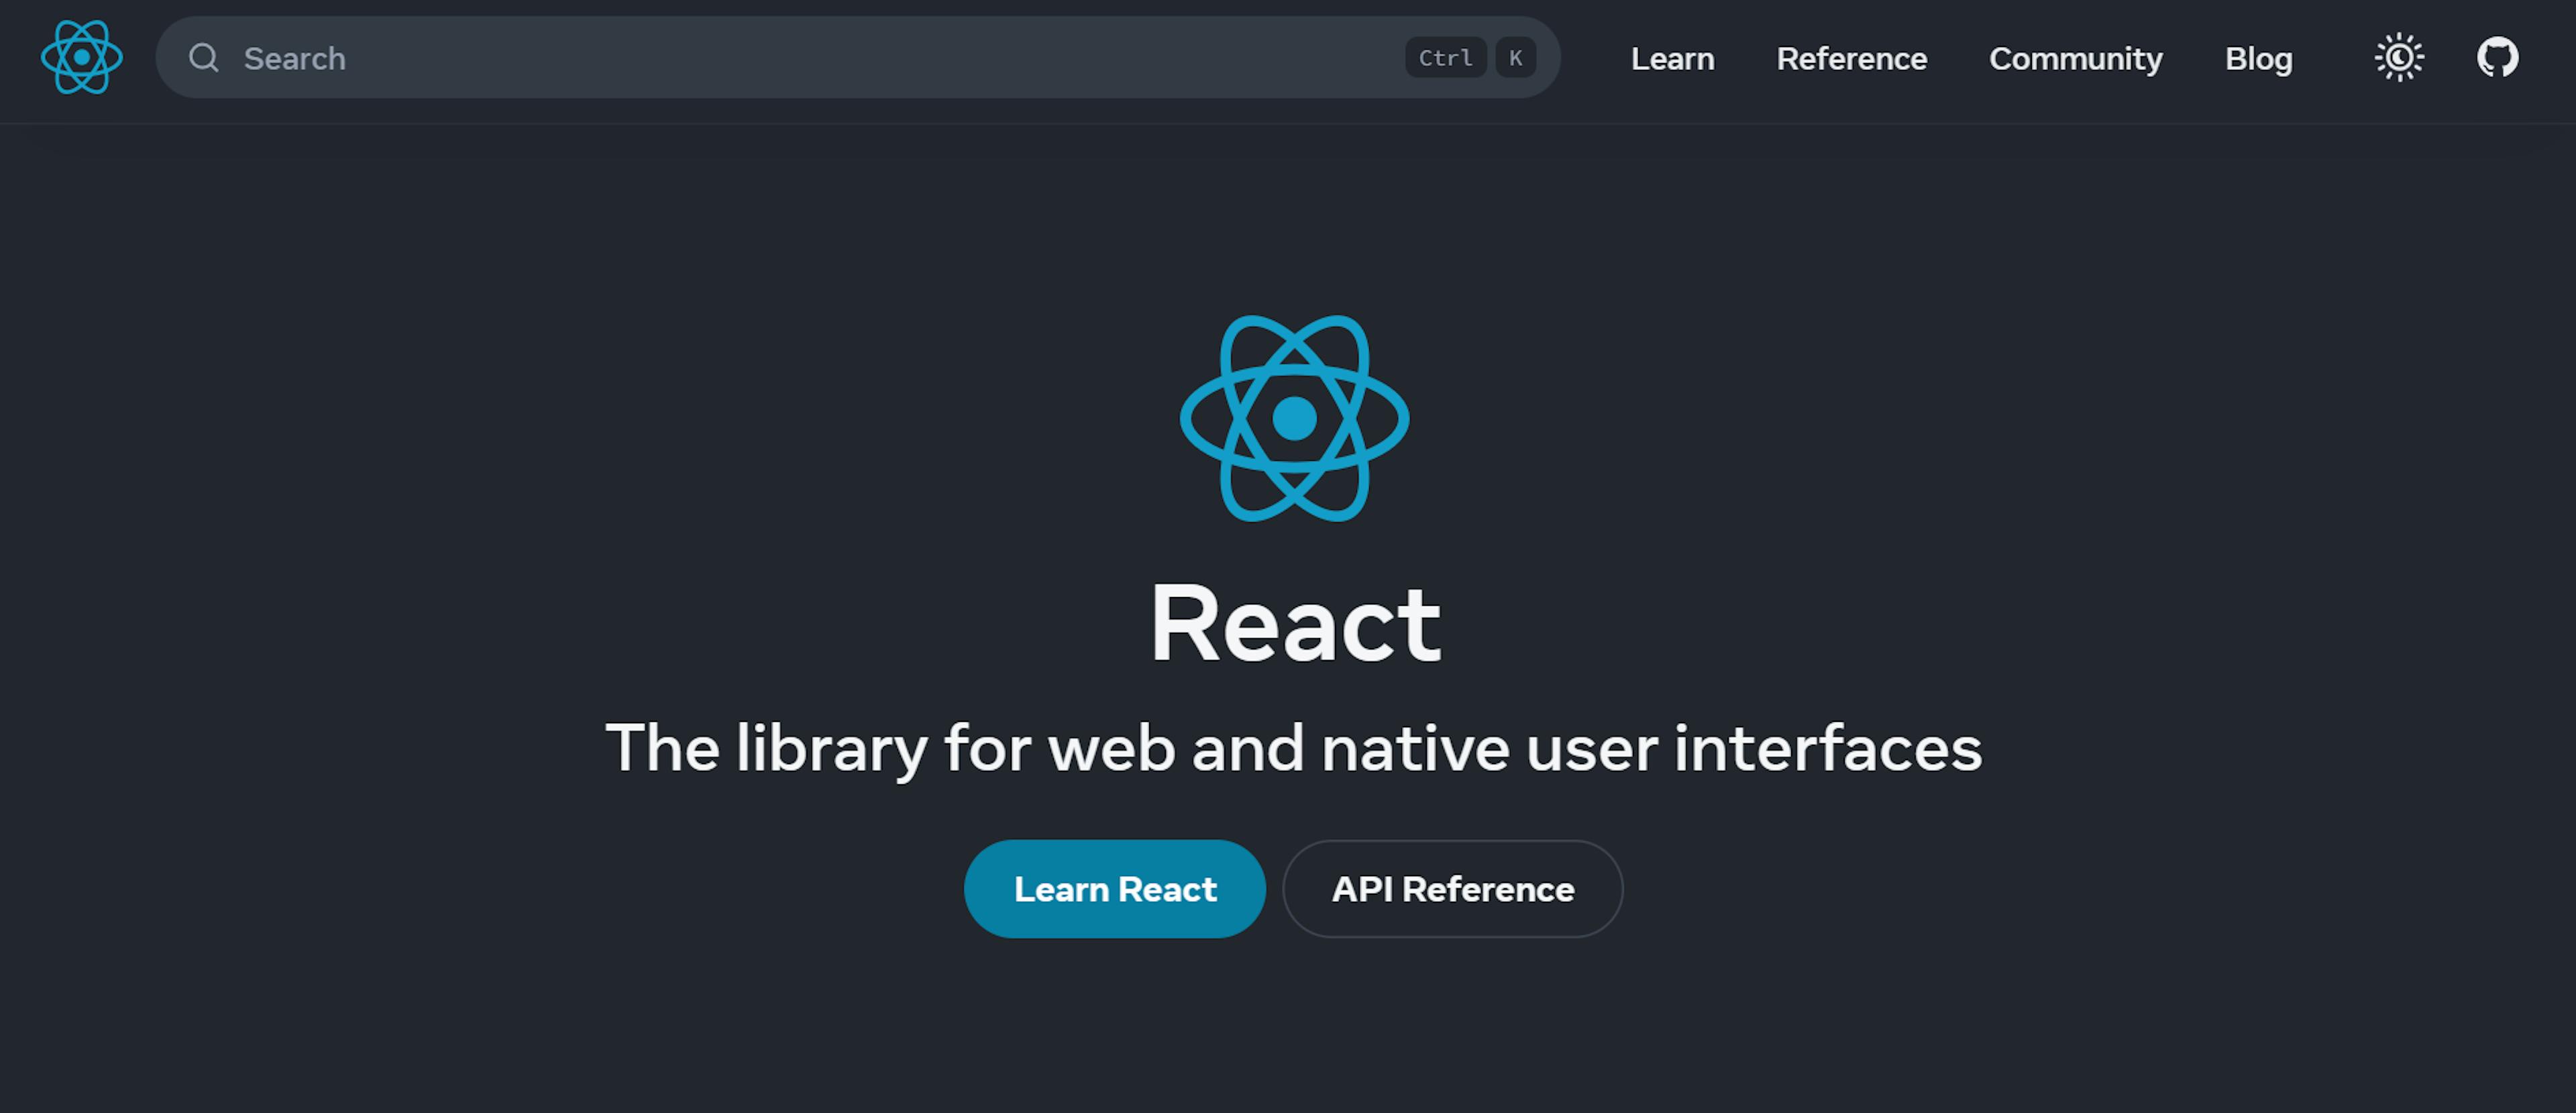 A image of React website.